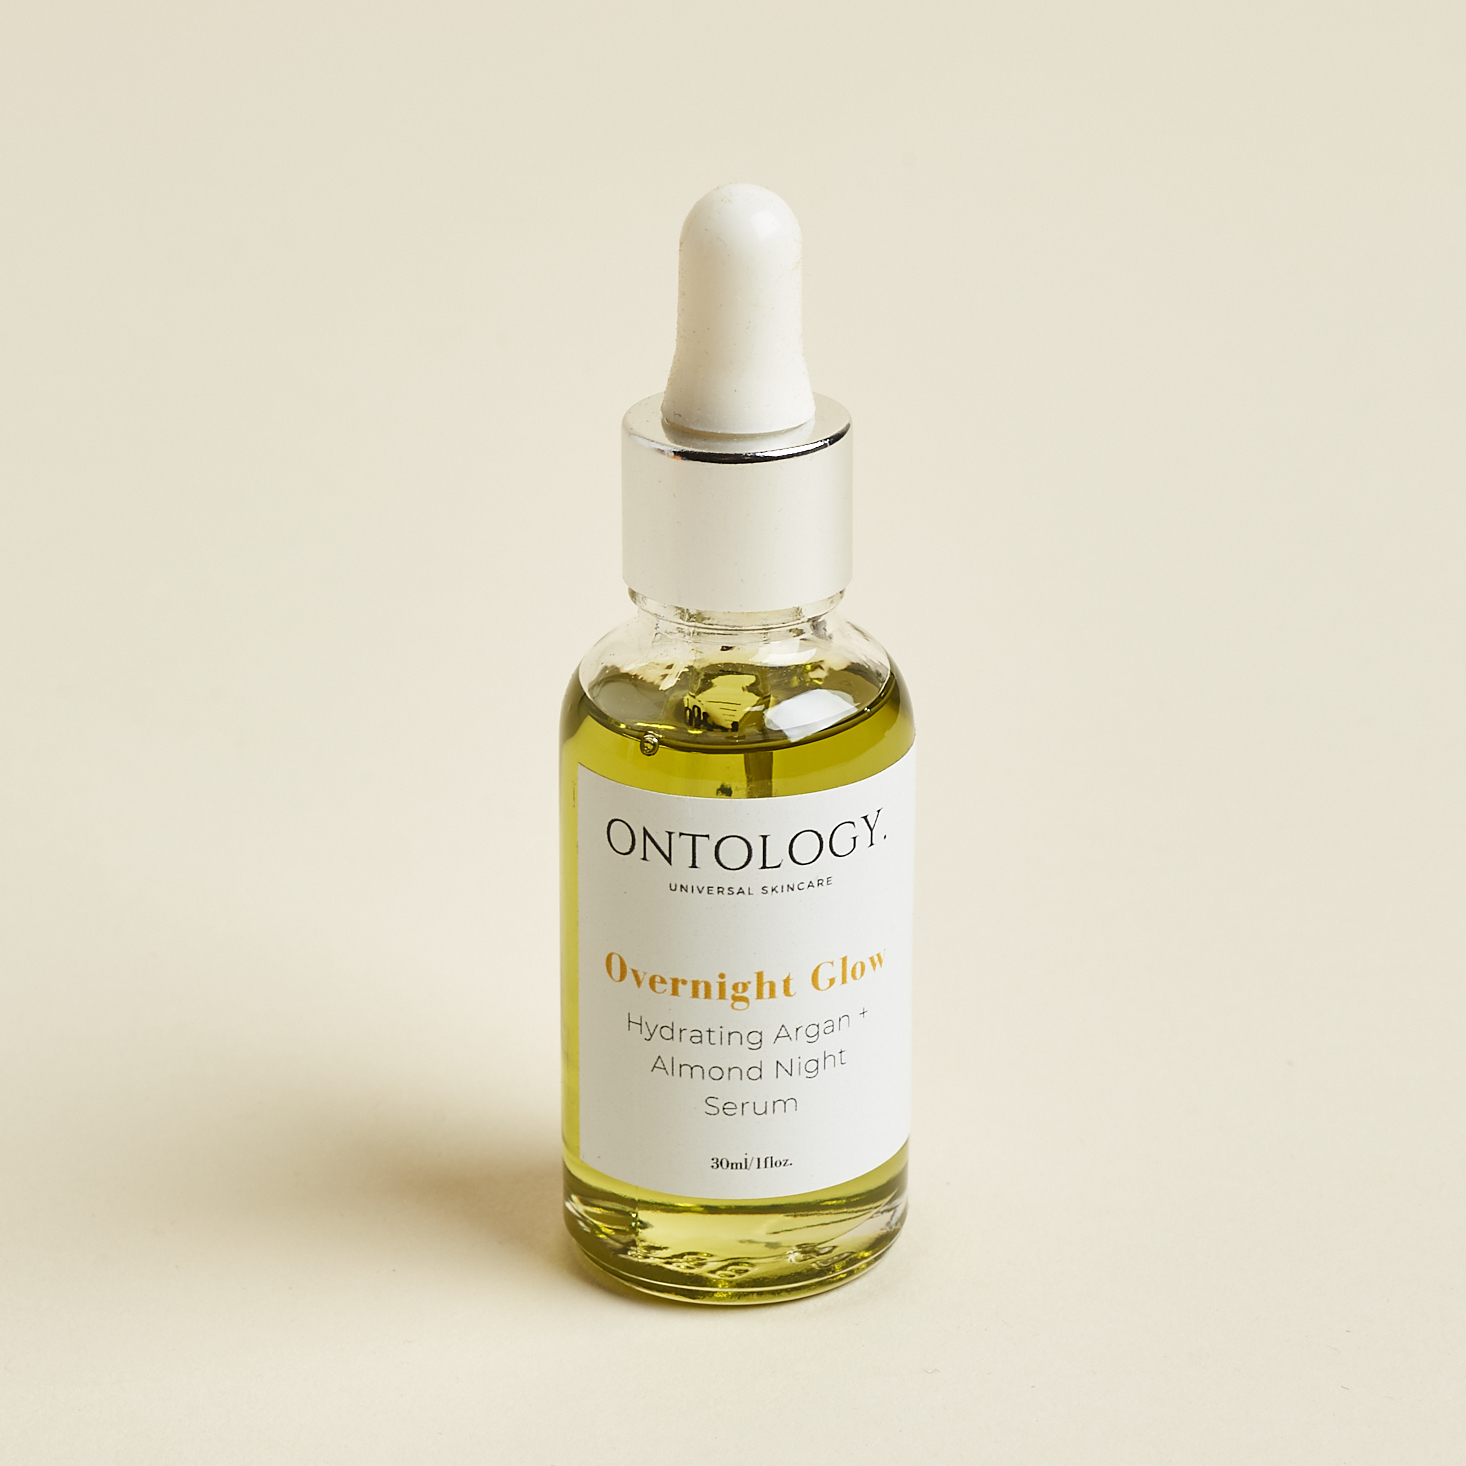 Ontology Overnight Glow serum from Love Goodly